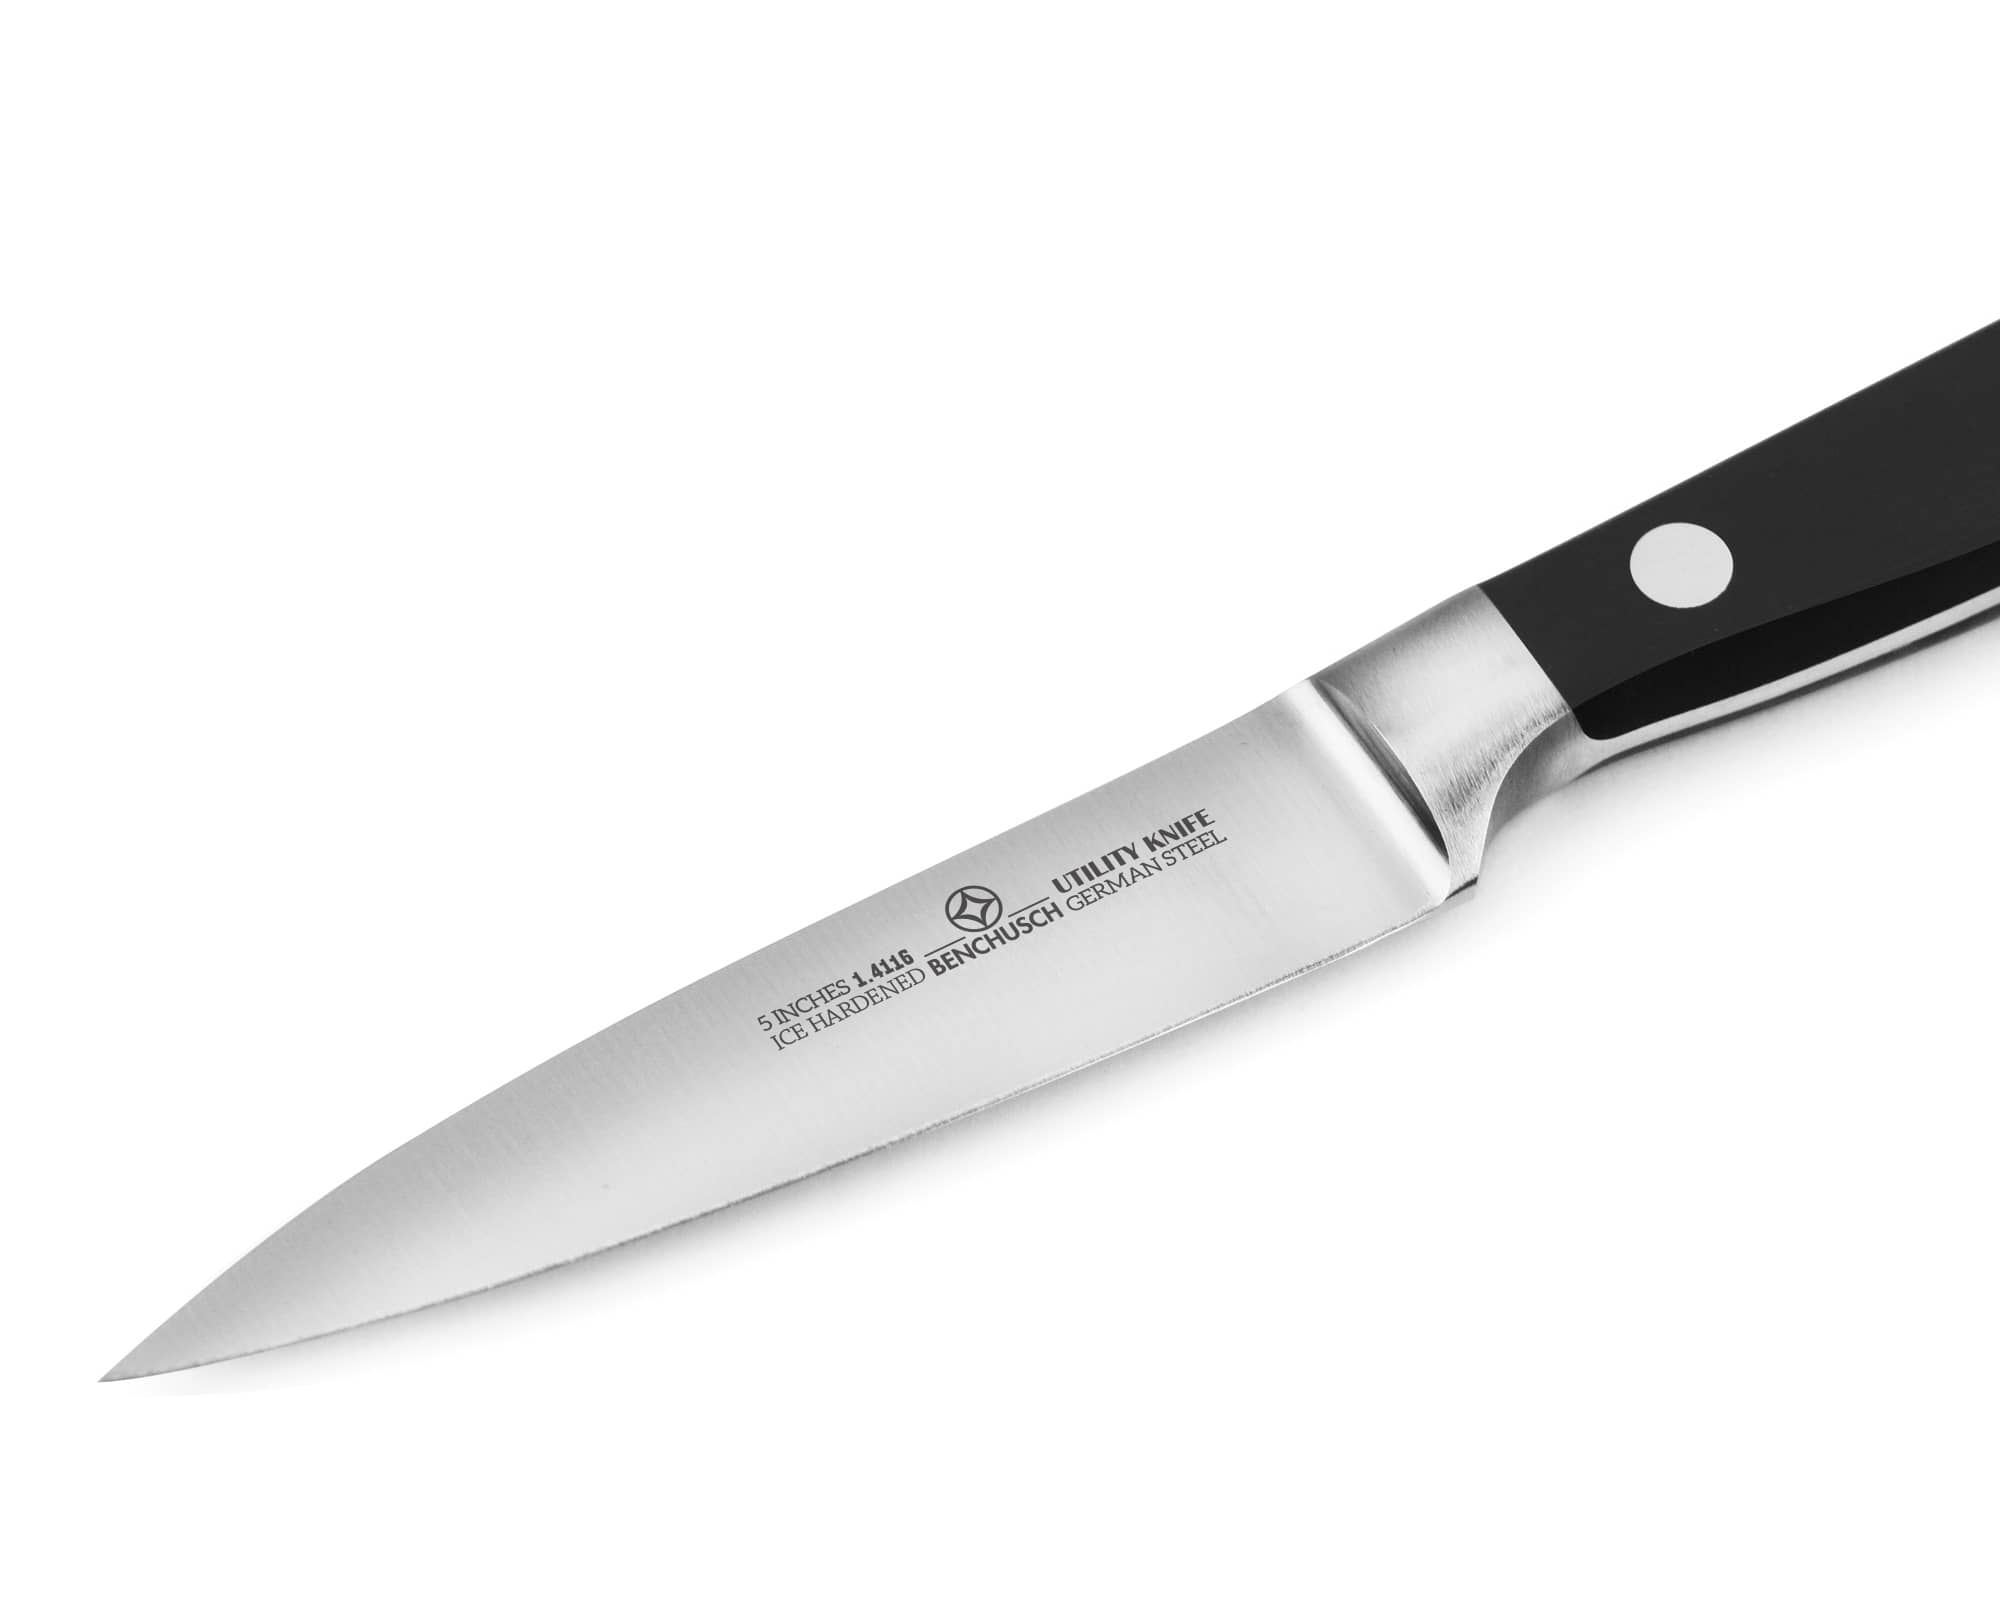 Isolated on the sharp blade crafted to perfection with Professional German Steel of Classic 5-inch Utility Knife